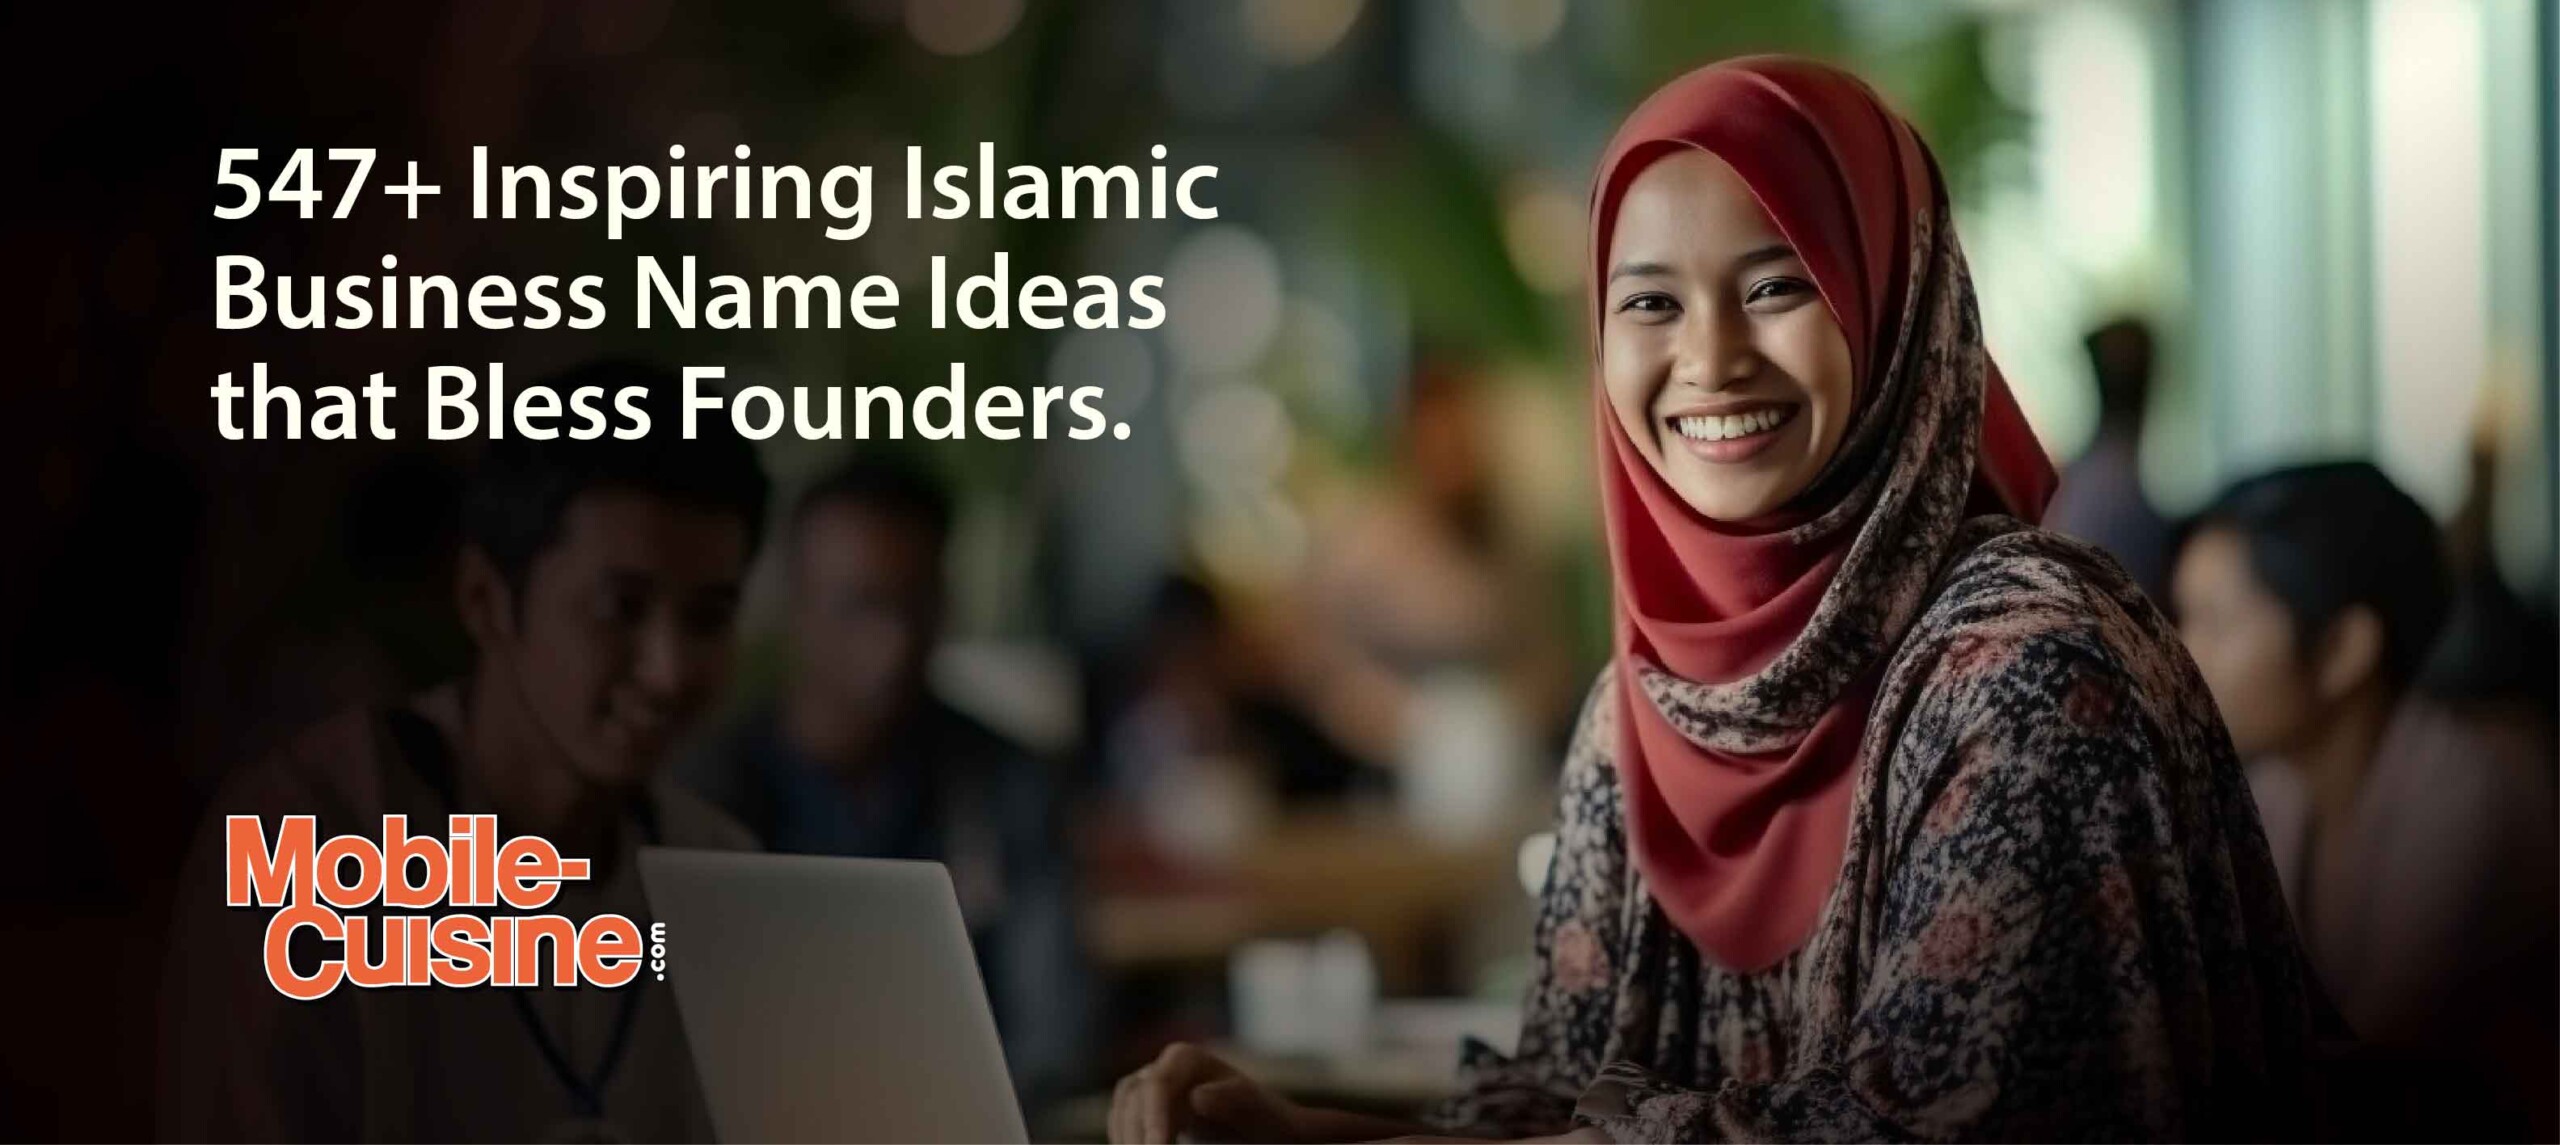 547+ Inspiring Islamic Business Name Ideas that Bless Founders